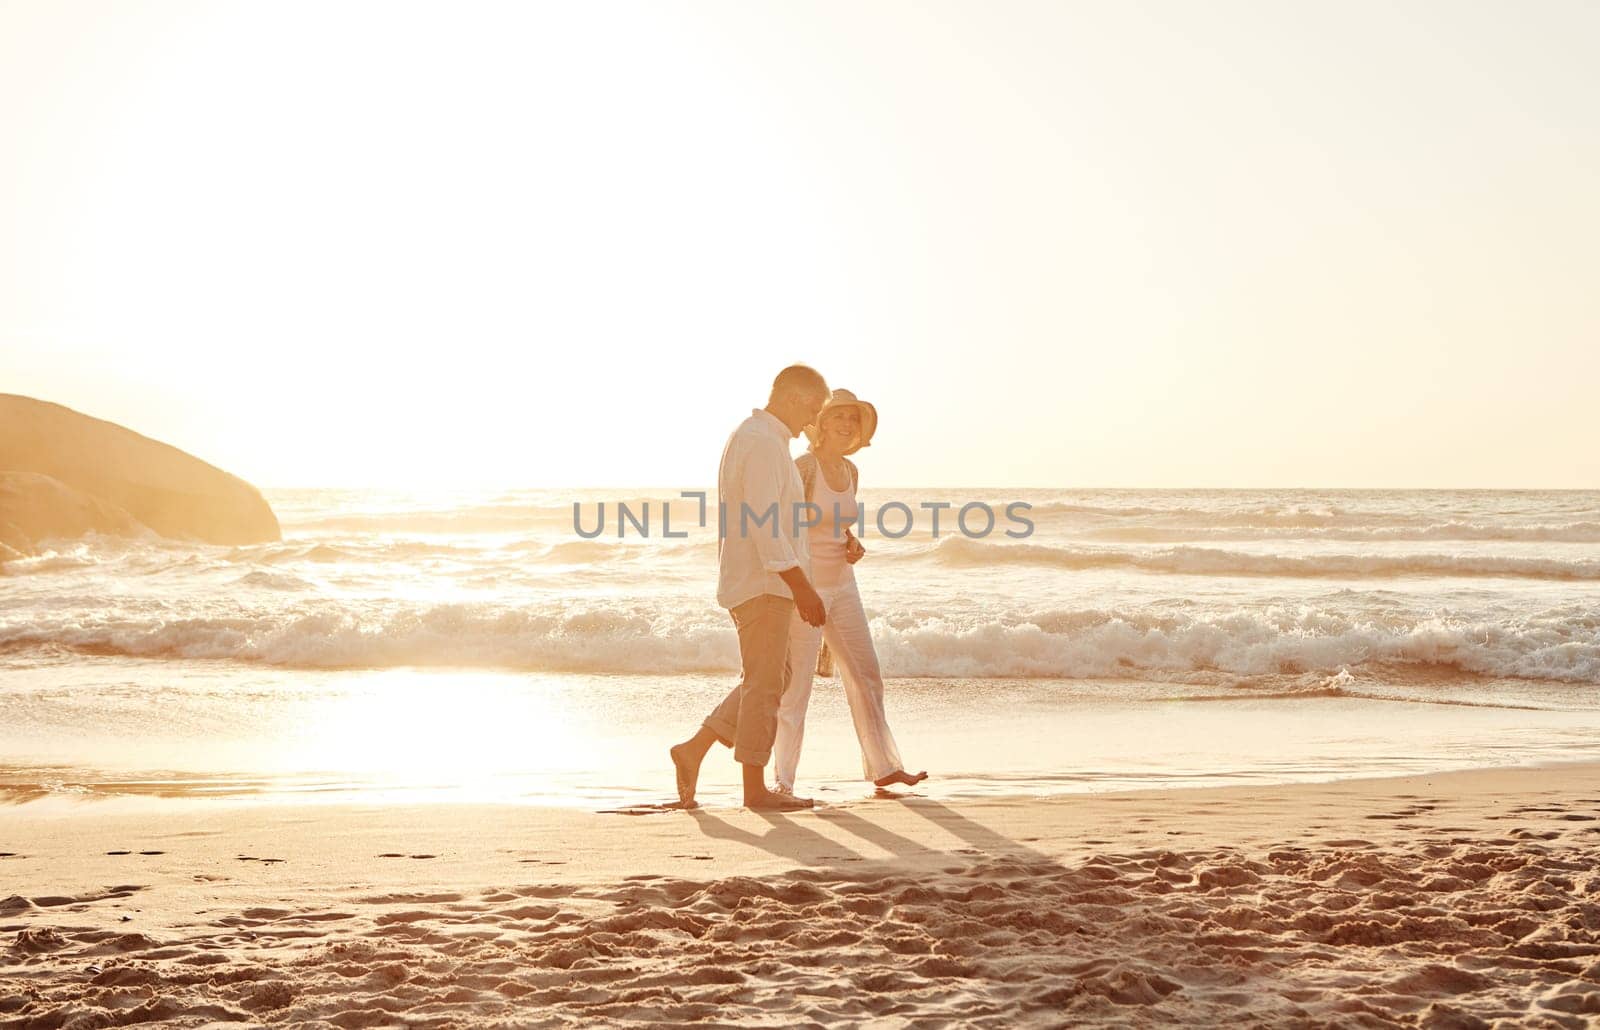 Romance never gets old. Full length shot of an affectionate middle aged couple walking hand in hand along the beach at sunset